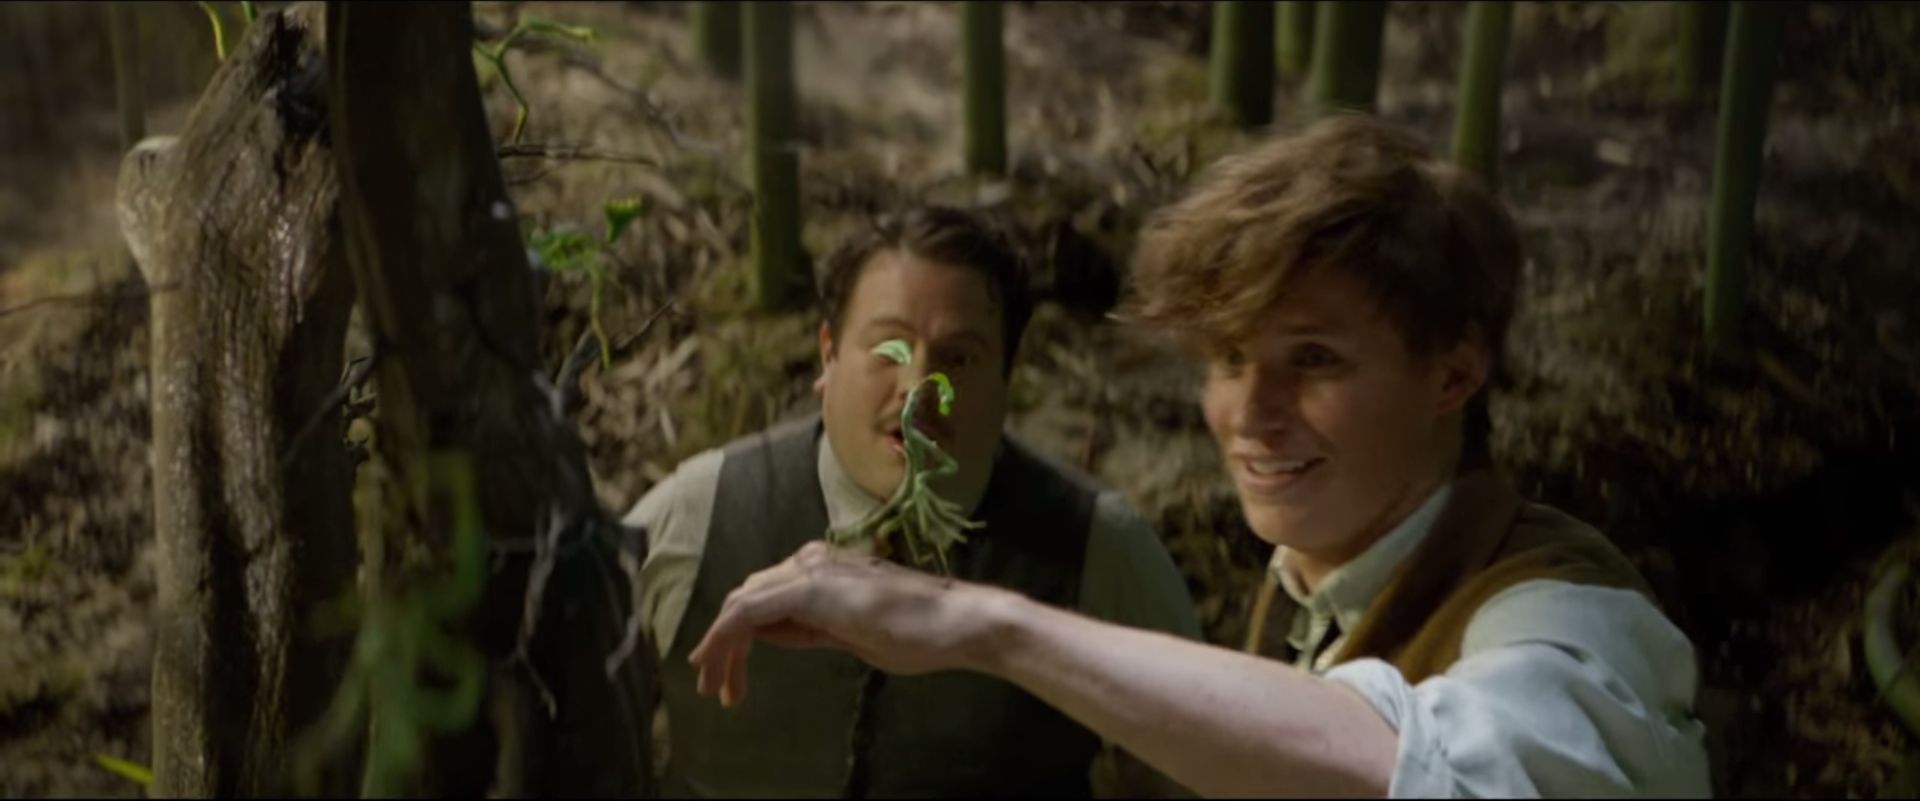 Film Online Fantastic Beasts And Where To Find Them Watch 2016